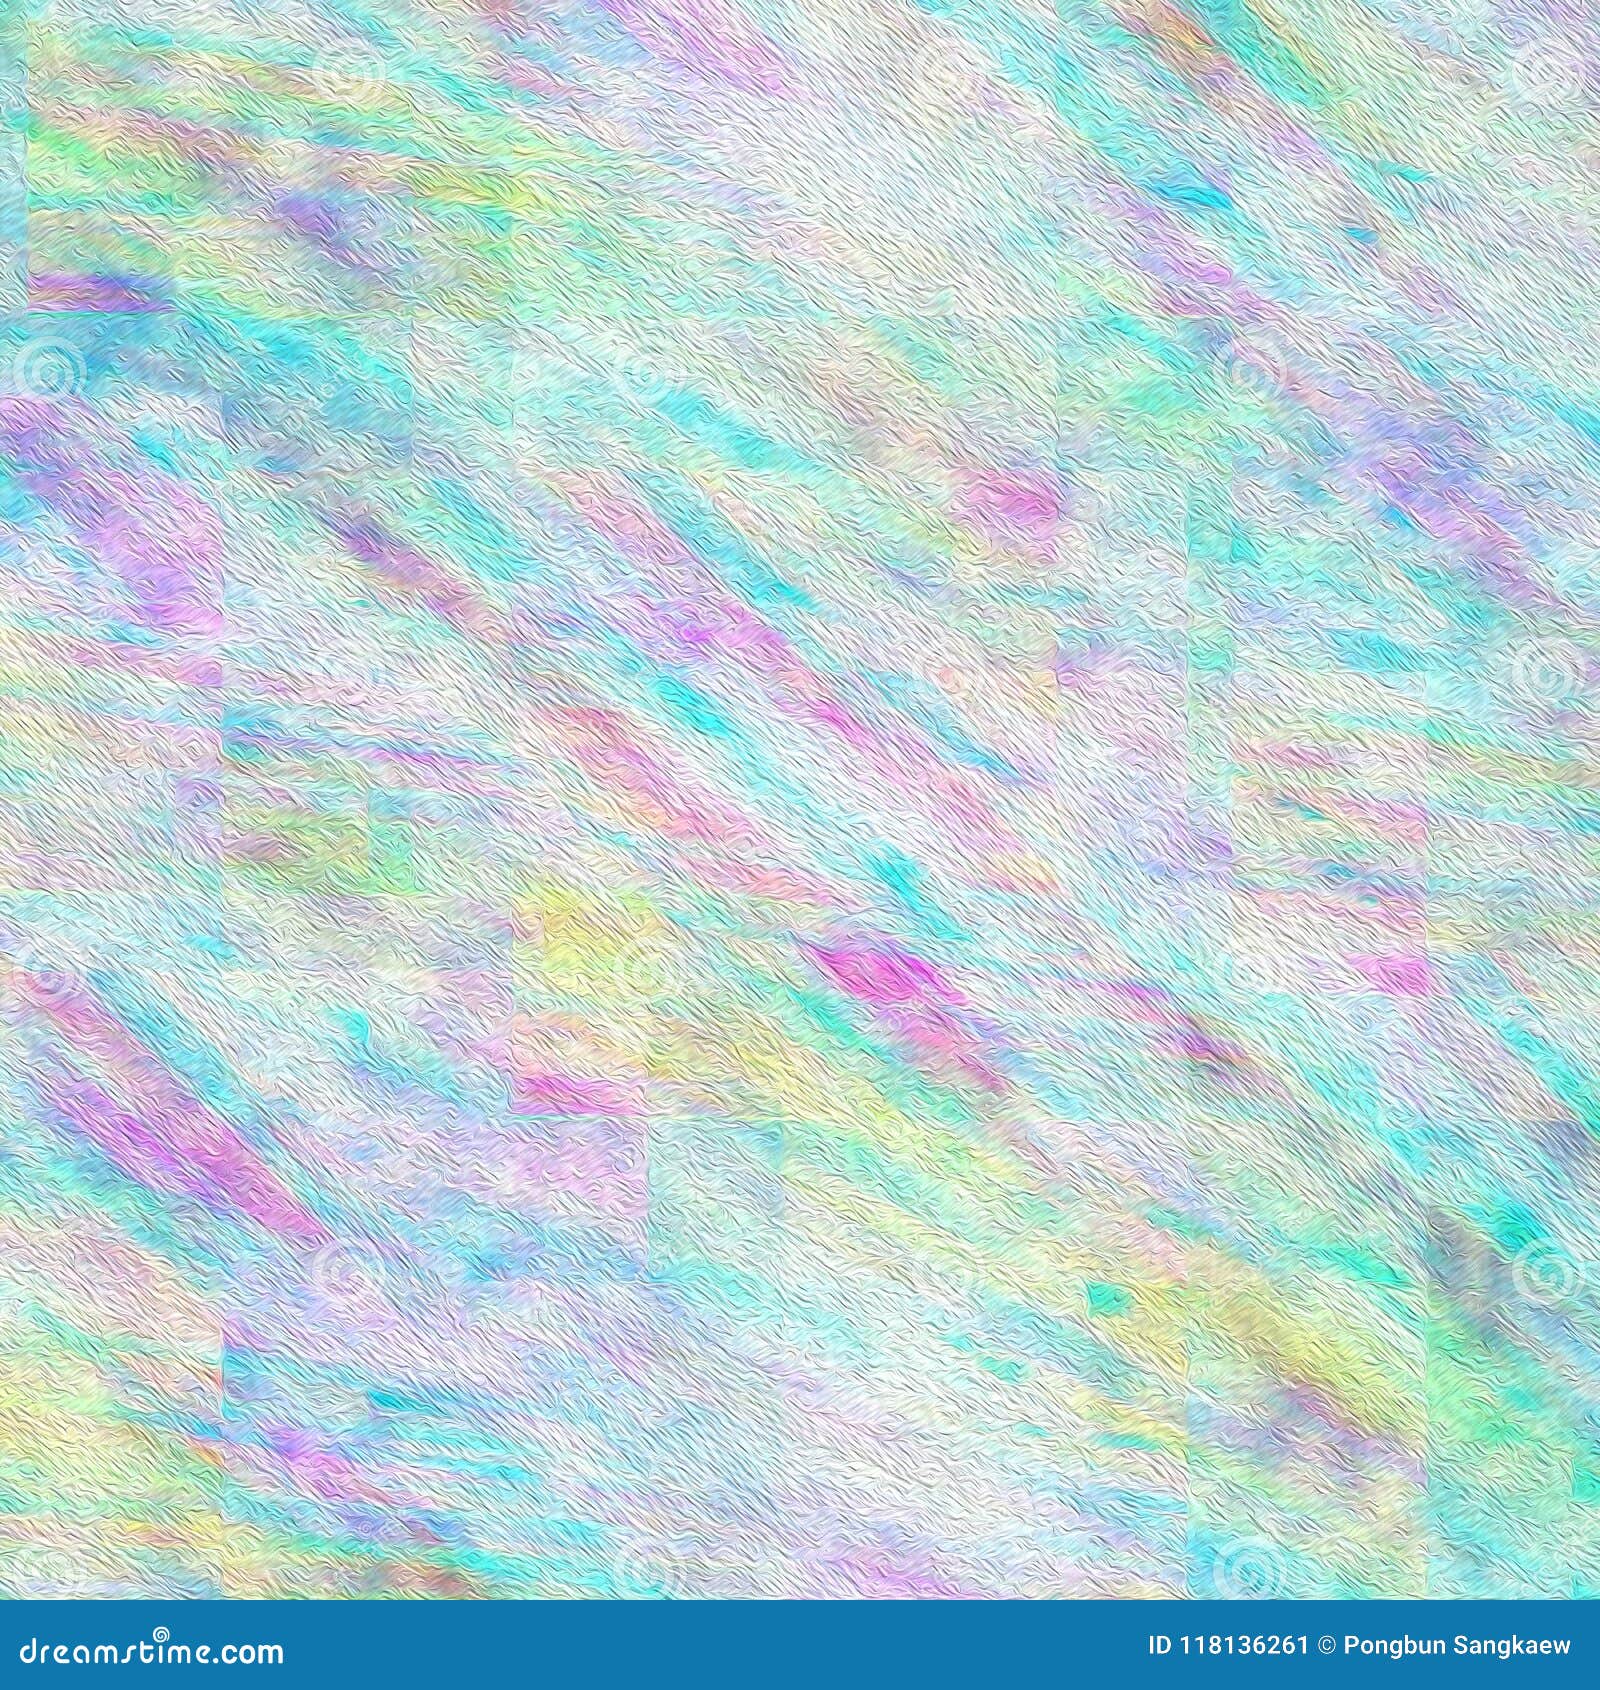 Blue And Pink Pastel Color Abstract Oil Paint Wallpaper Background